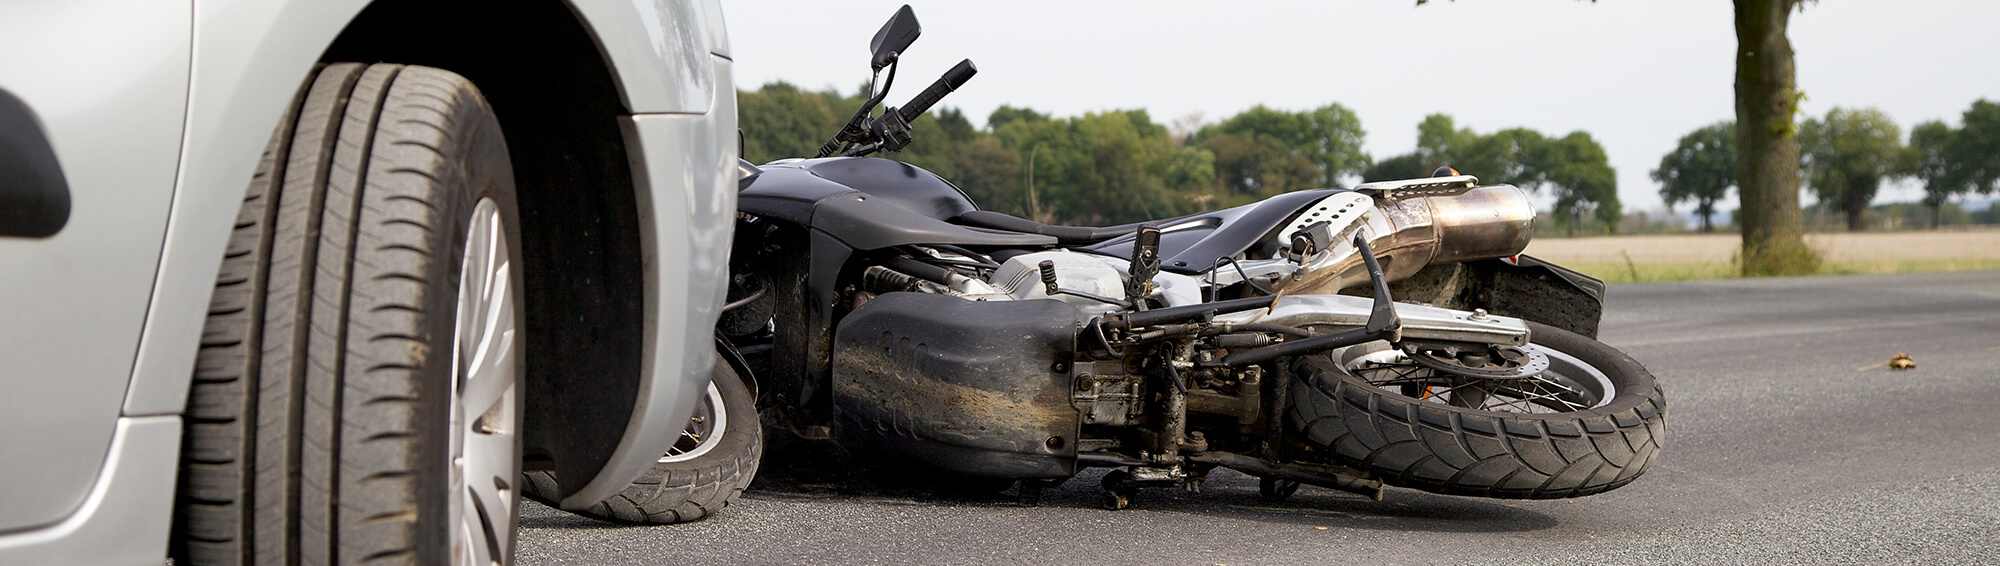 Be Aware of Motorcyclists During Motorcycle Safety Awareness Month